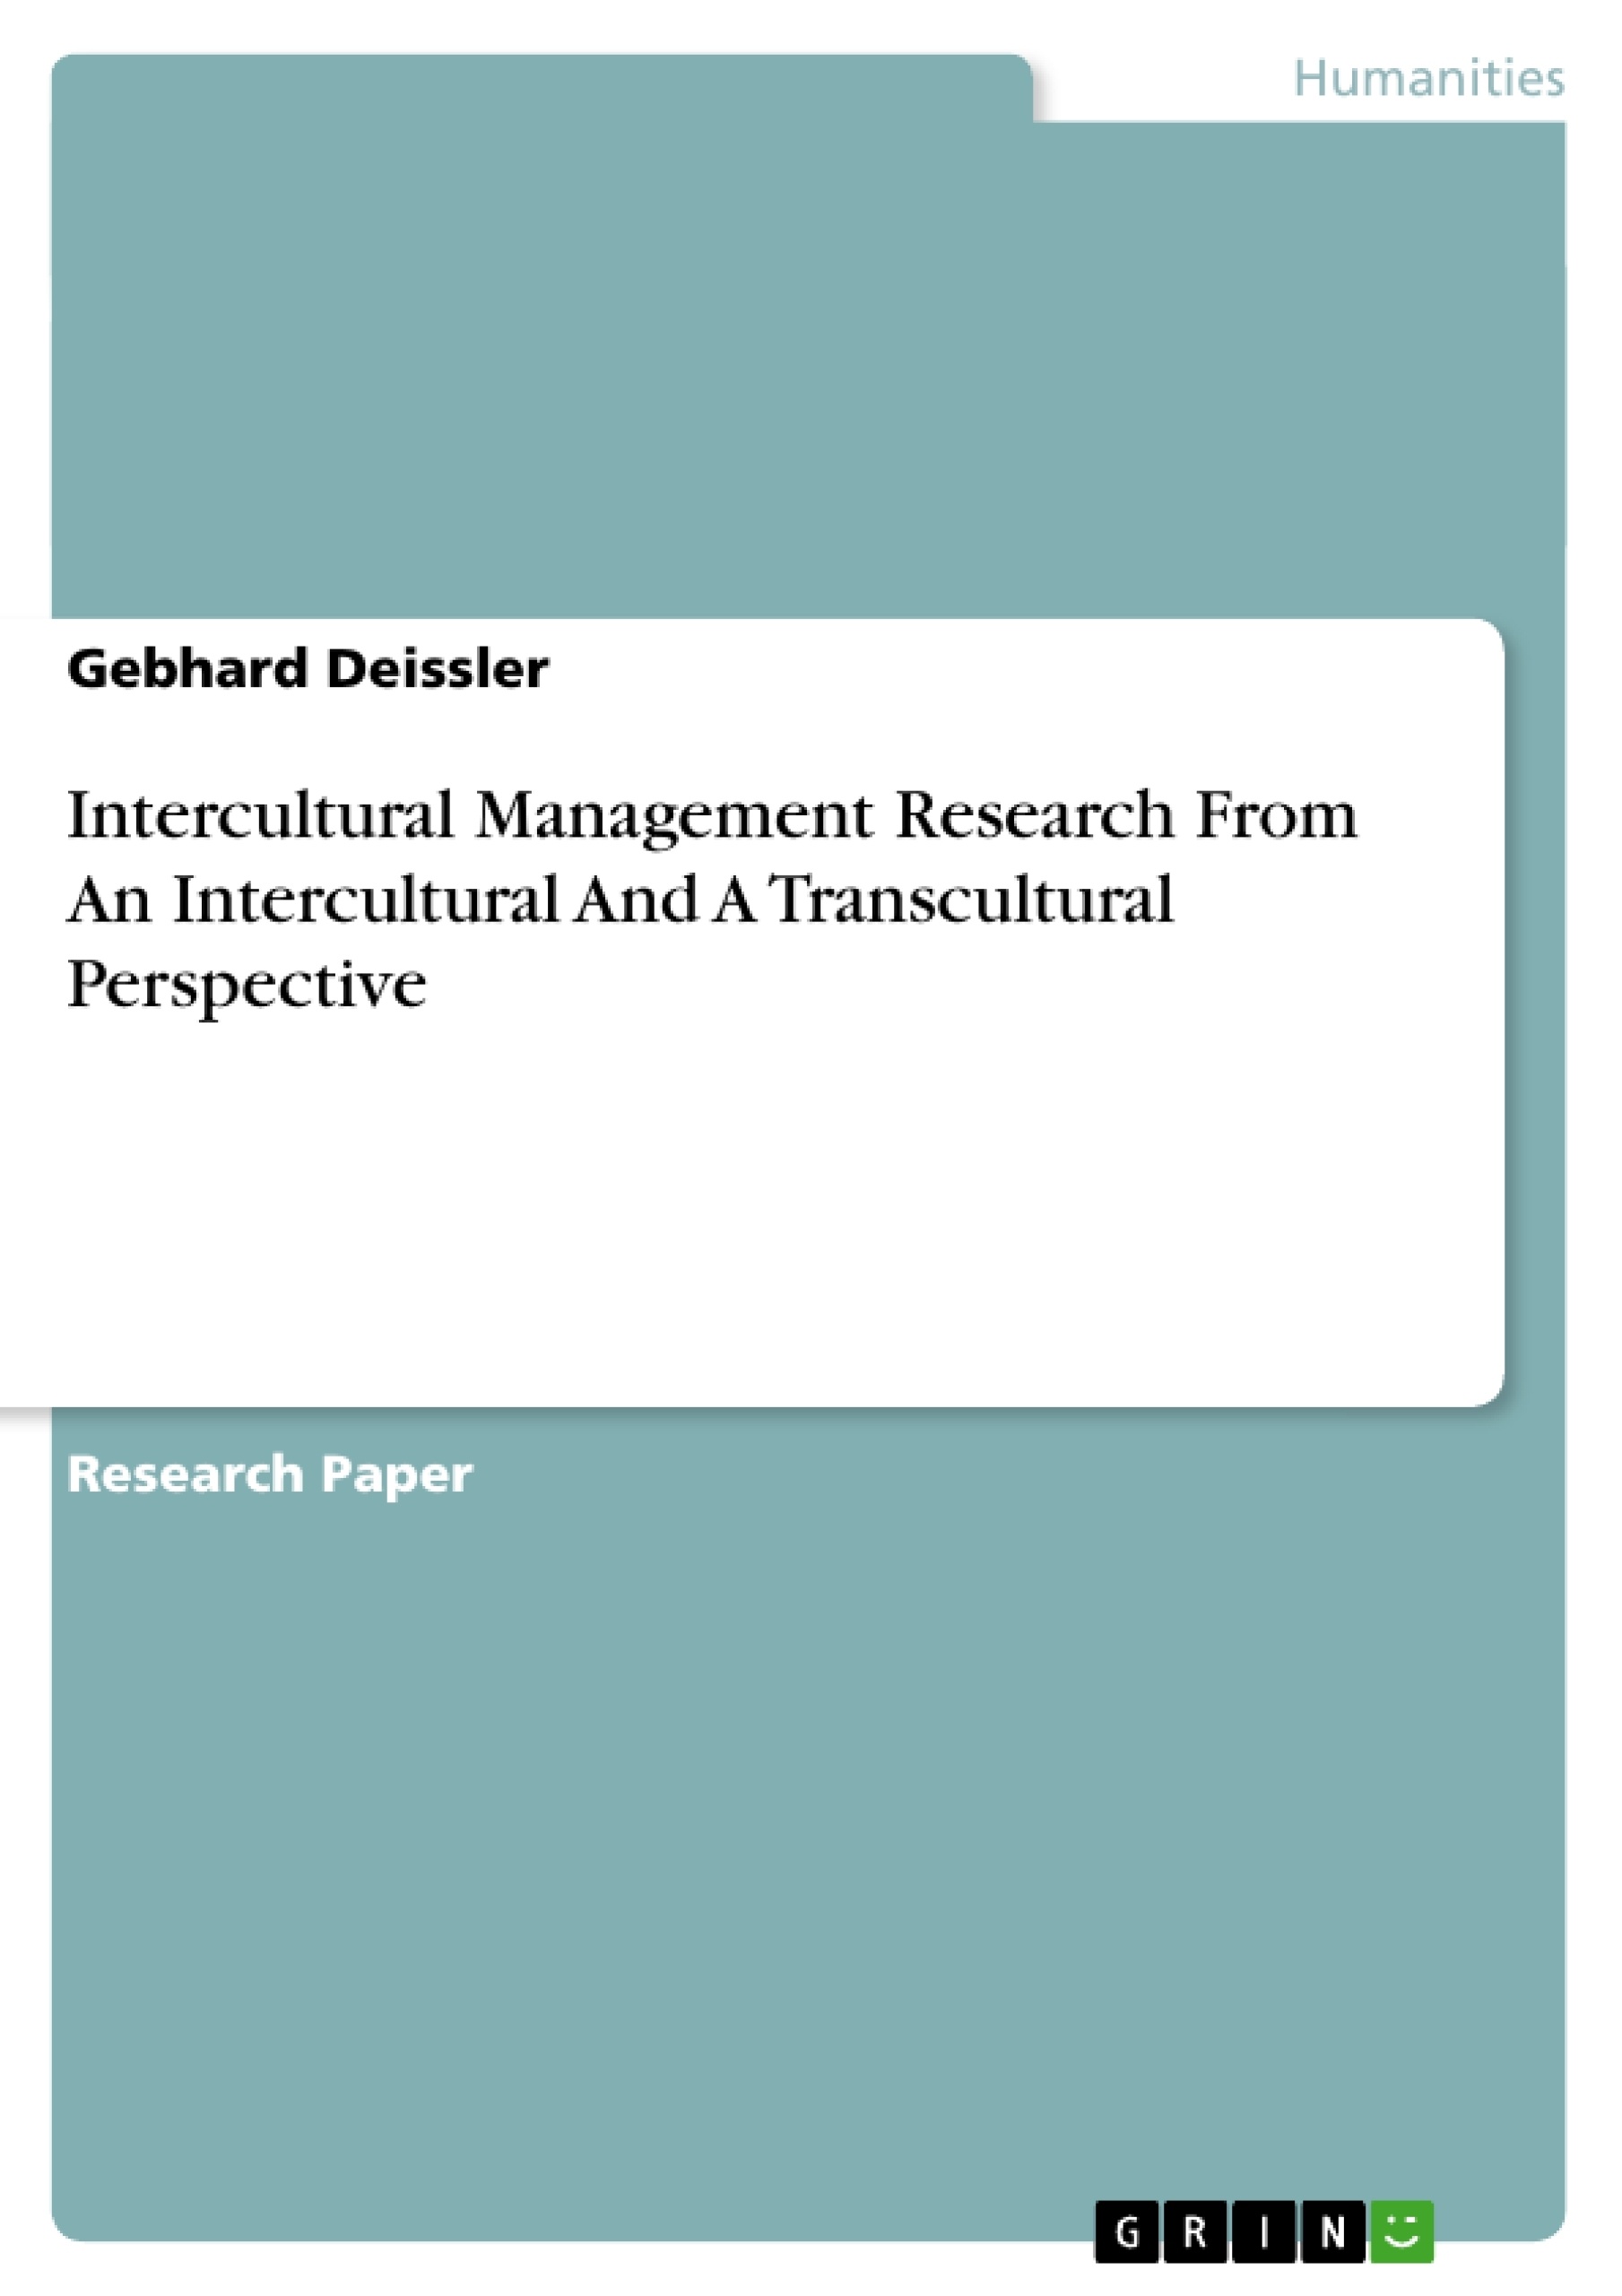 Title: Intercultural Management Research From An Intercultural And A Transcultural Perspective